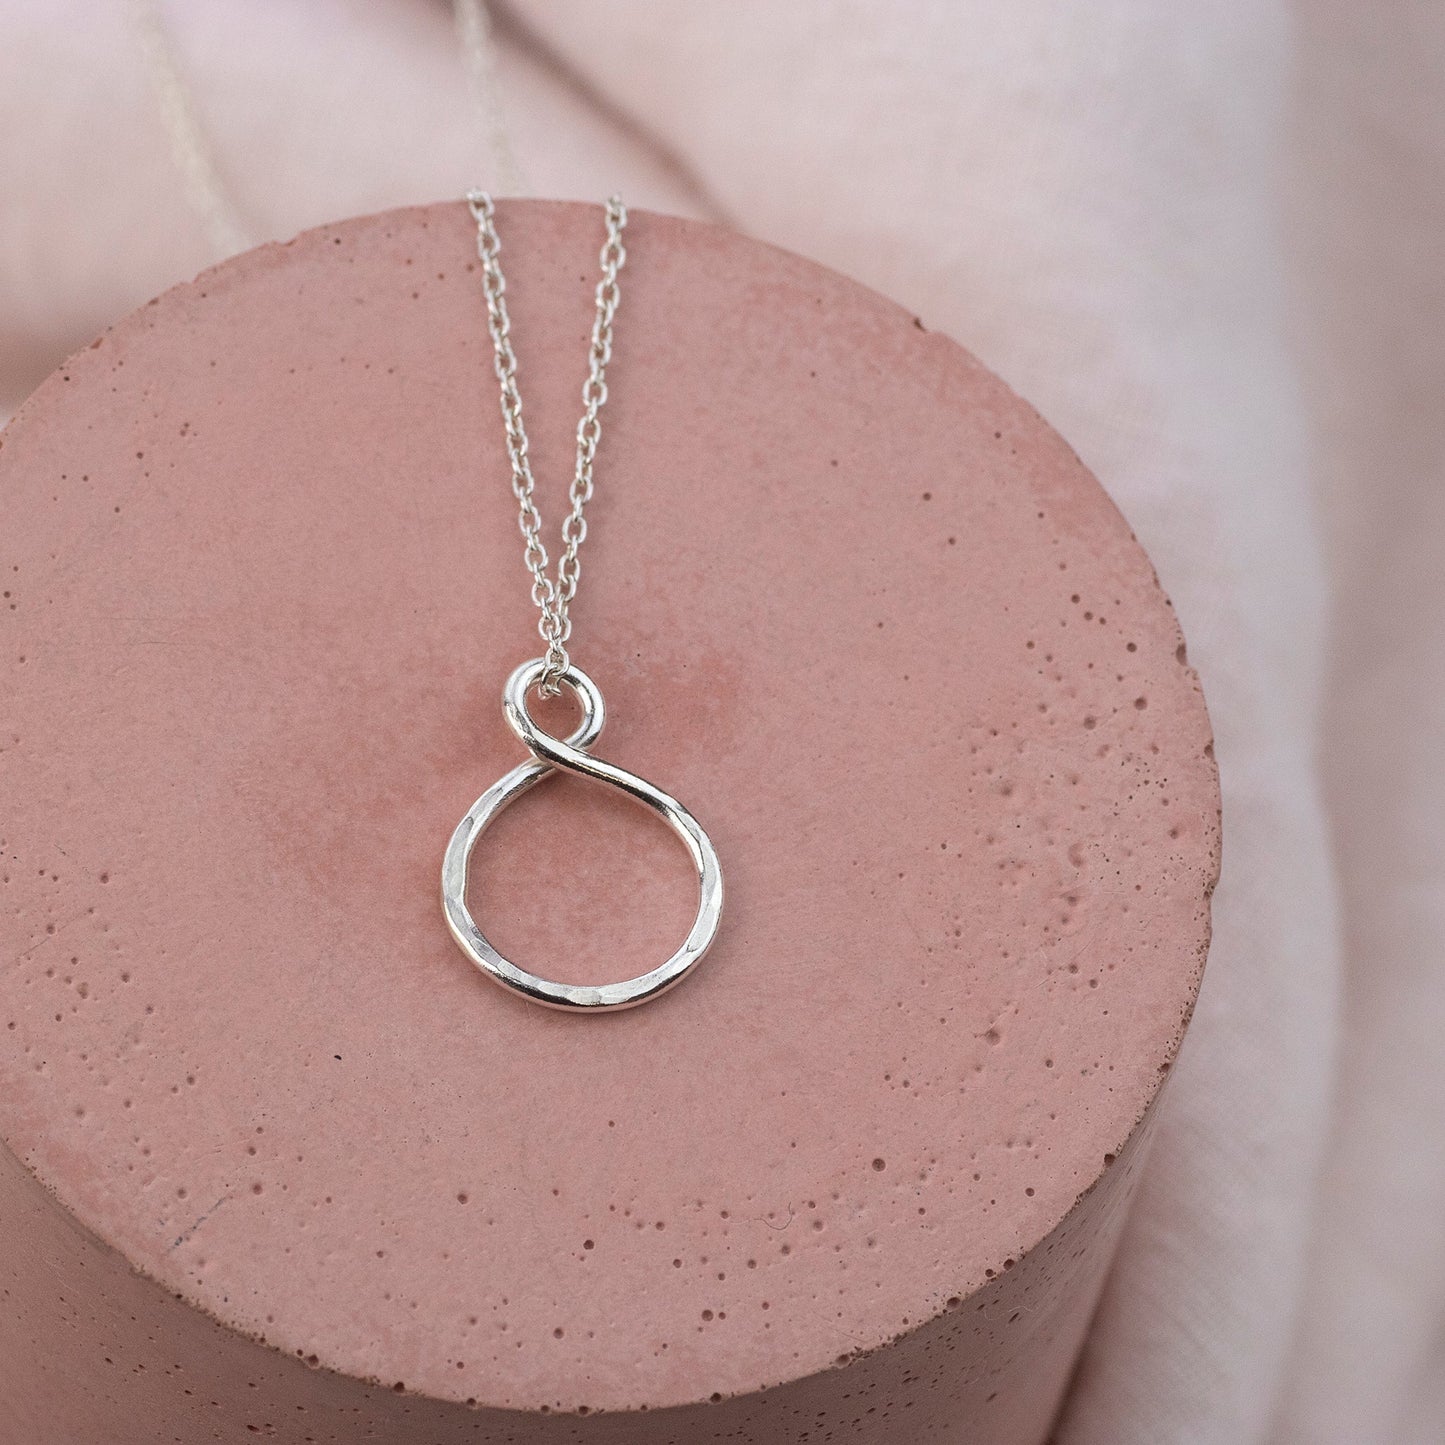 21st Birthday Gift - Petite Infinity Necklace - Silver